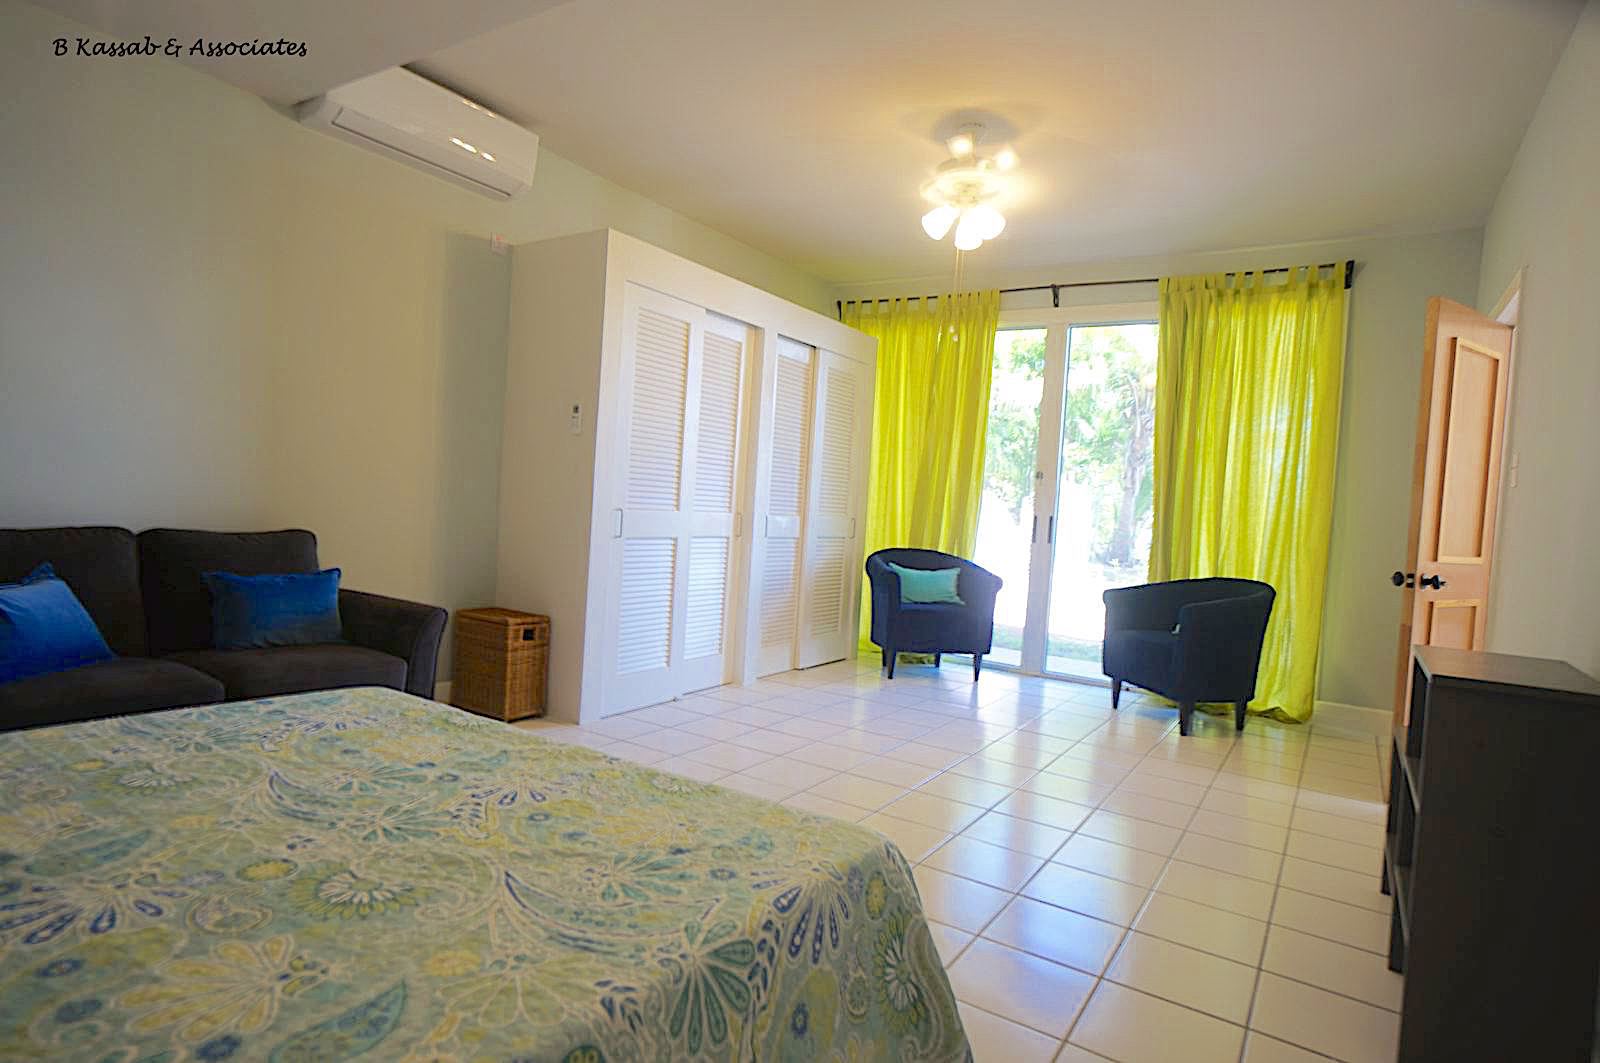 Click here to see rental listing details and photos for this St Kitts and Nevis Real Estate Rental Property